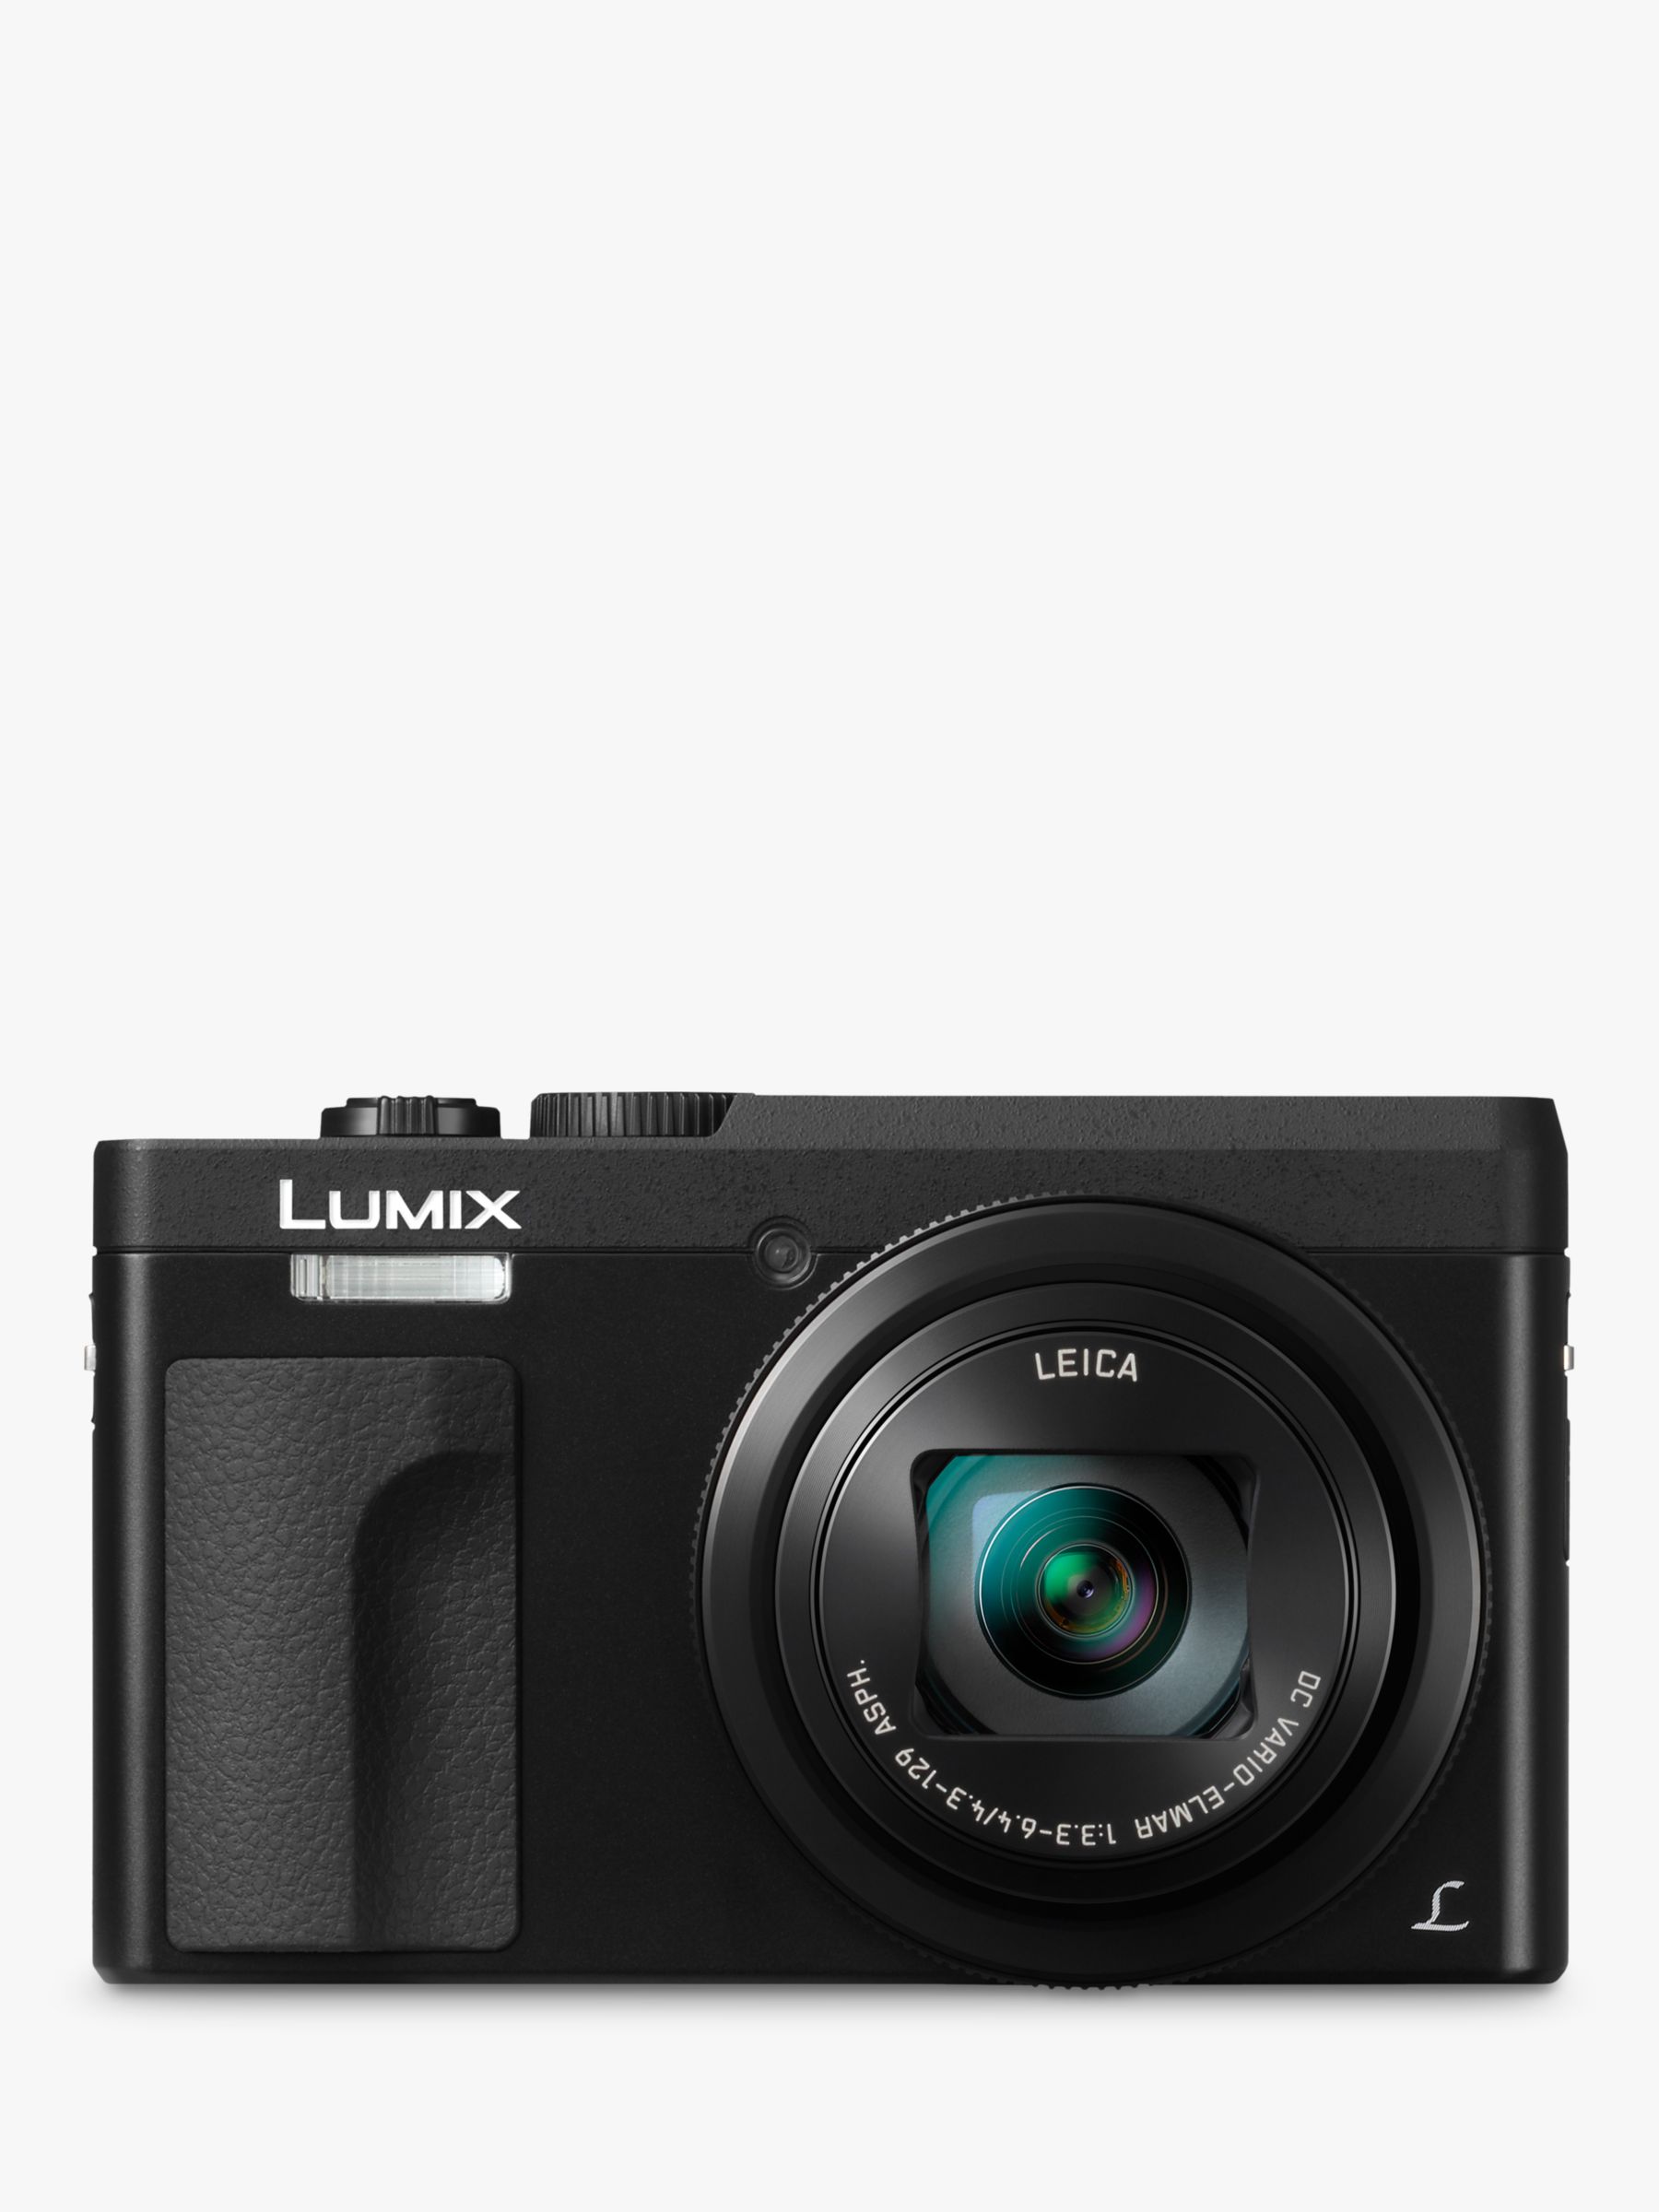 Image of Panasonic Lumix DCTZ90 Super Zoom Digital Camera 4K Ultra HD 203MP 30x Optical Zoom WiFi EVF 3 LCD Tiltable Touch Screen